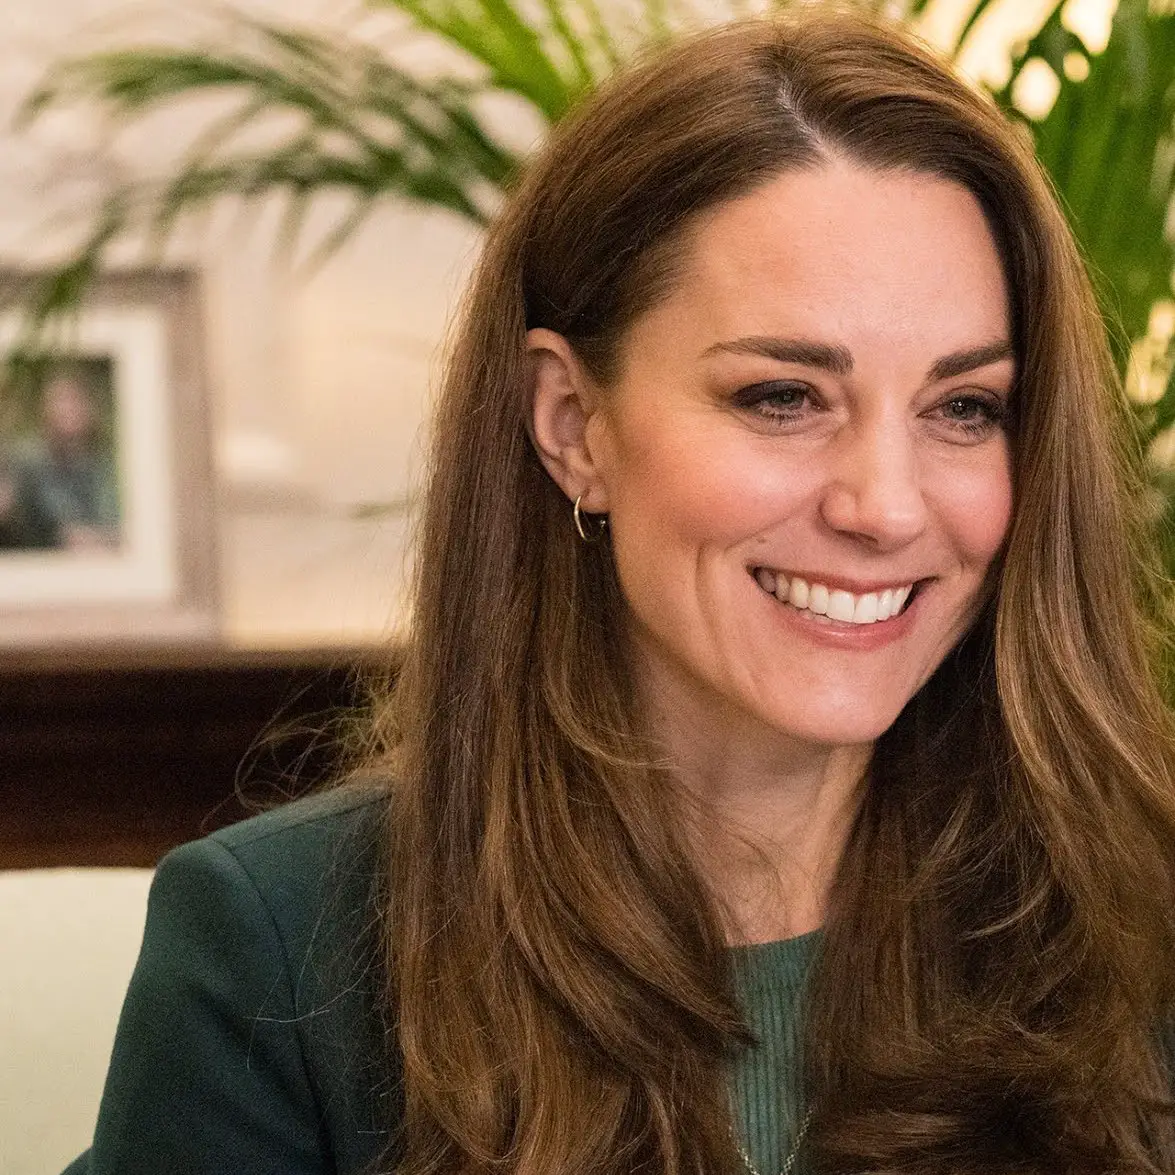 The Duchess of Cambridge had a very candid call to fellow parents